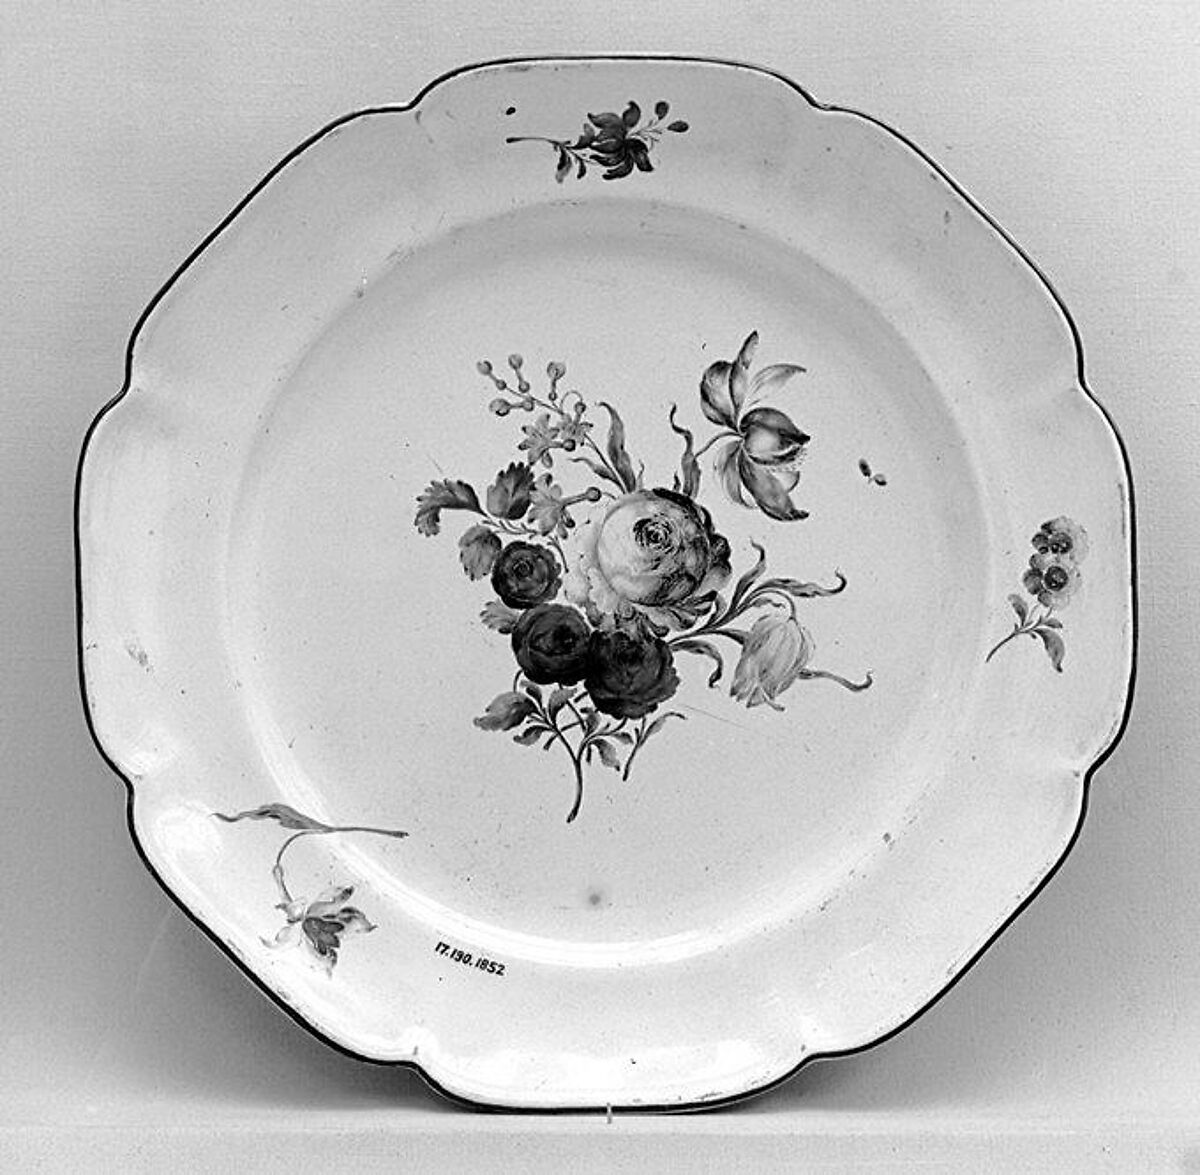 Plate, Period of Paul Hannong (1755–1759), Faience (tin-glazed earthenware), French, Strasbourg 